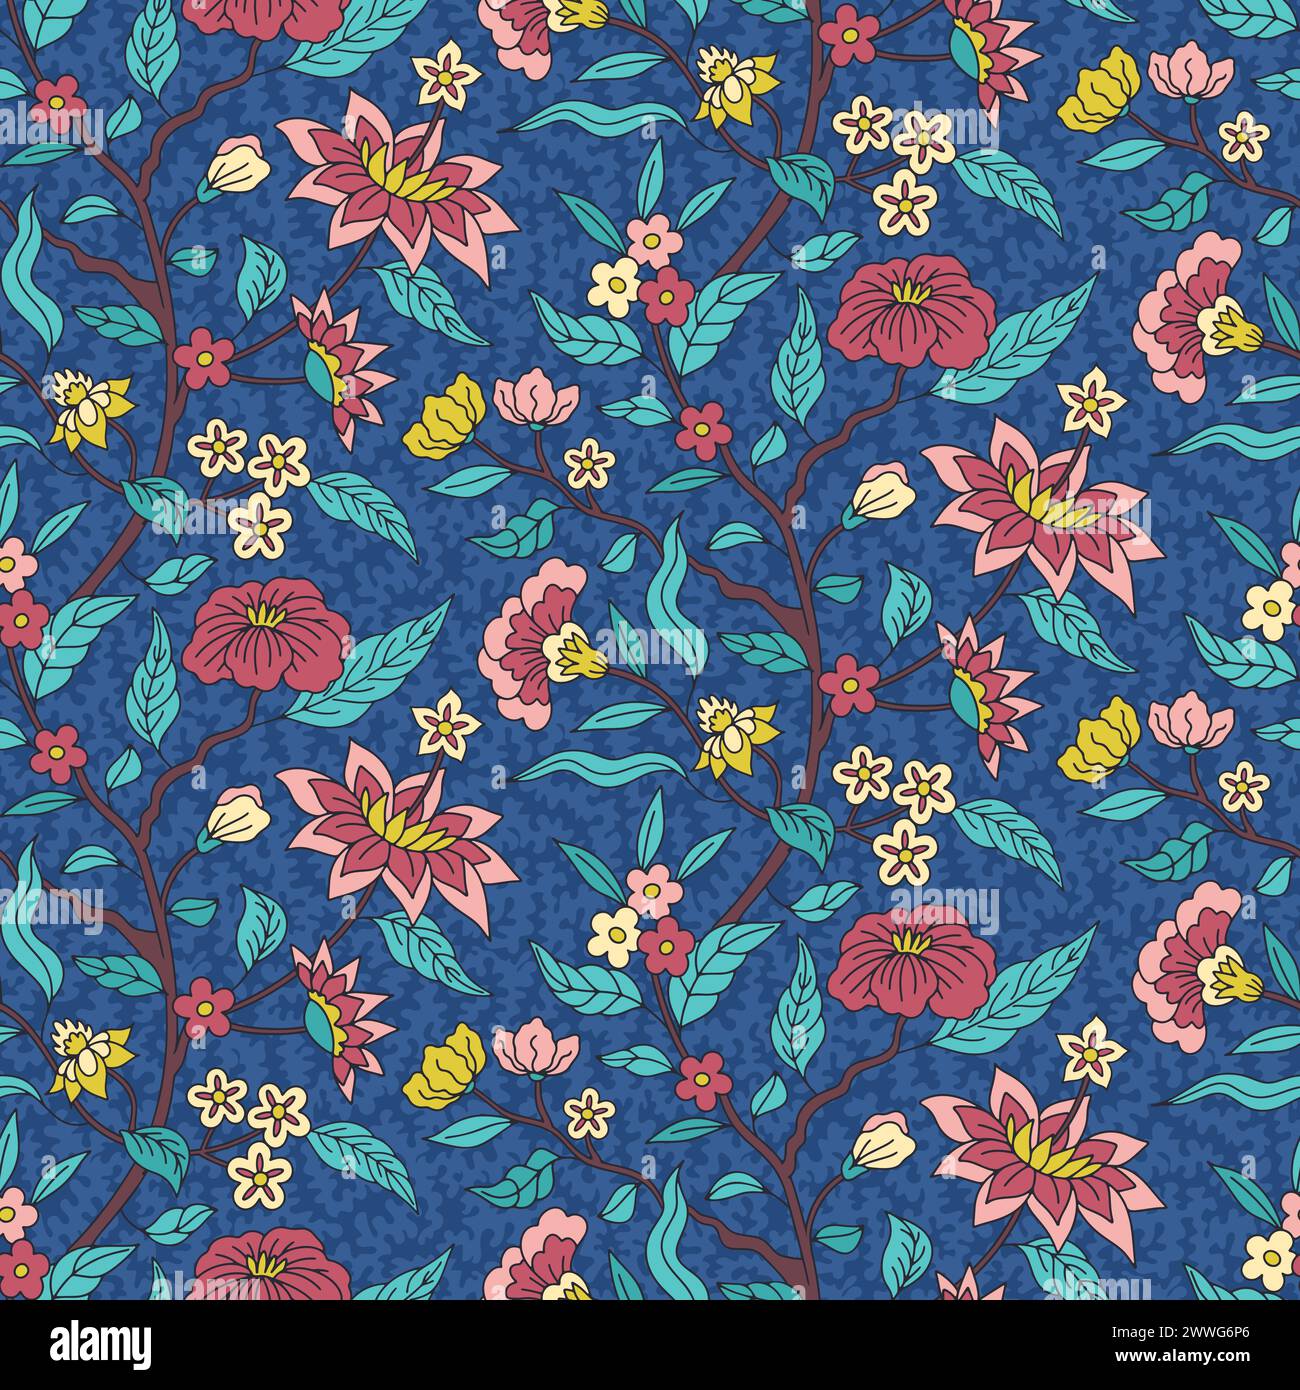 Floral seamless pattern with indian trailing flowers motifs Stock Vector